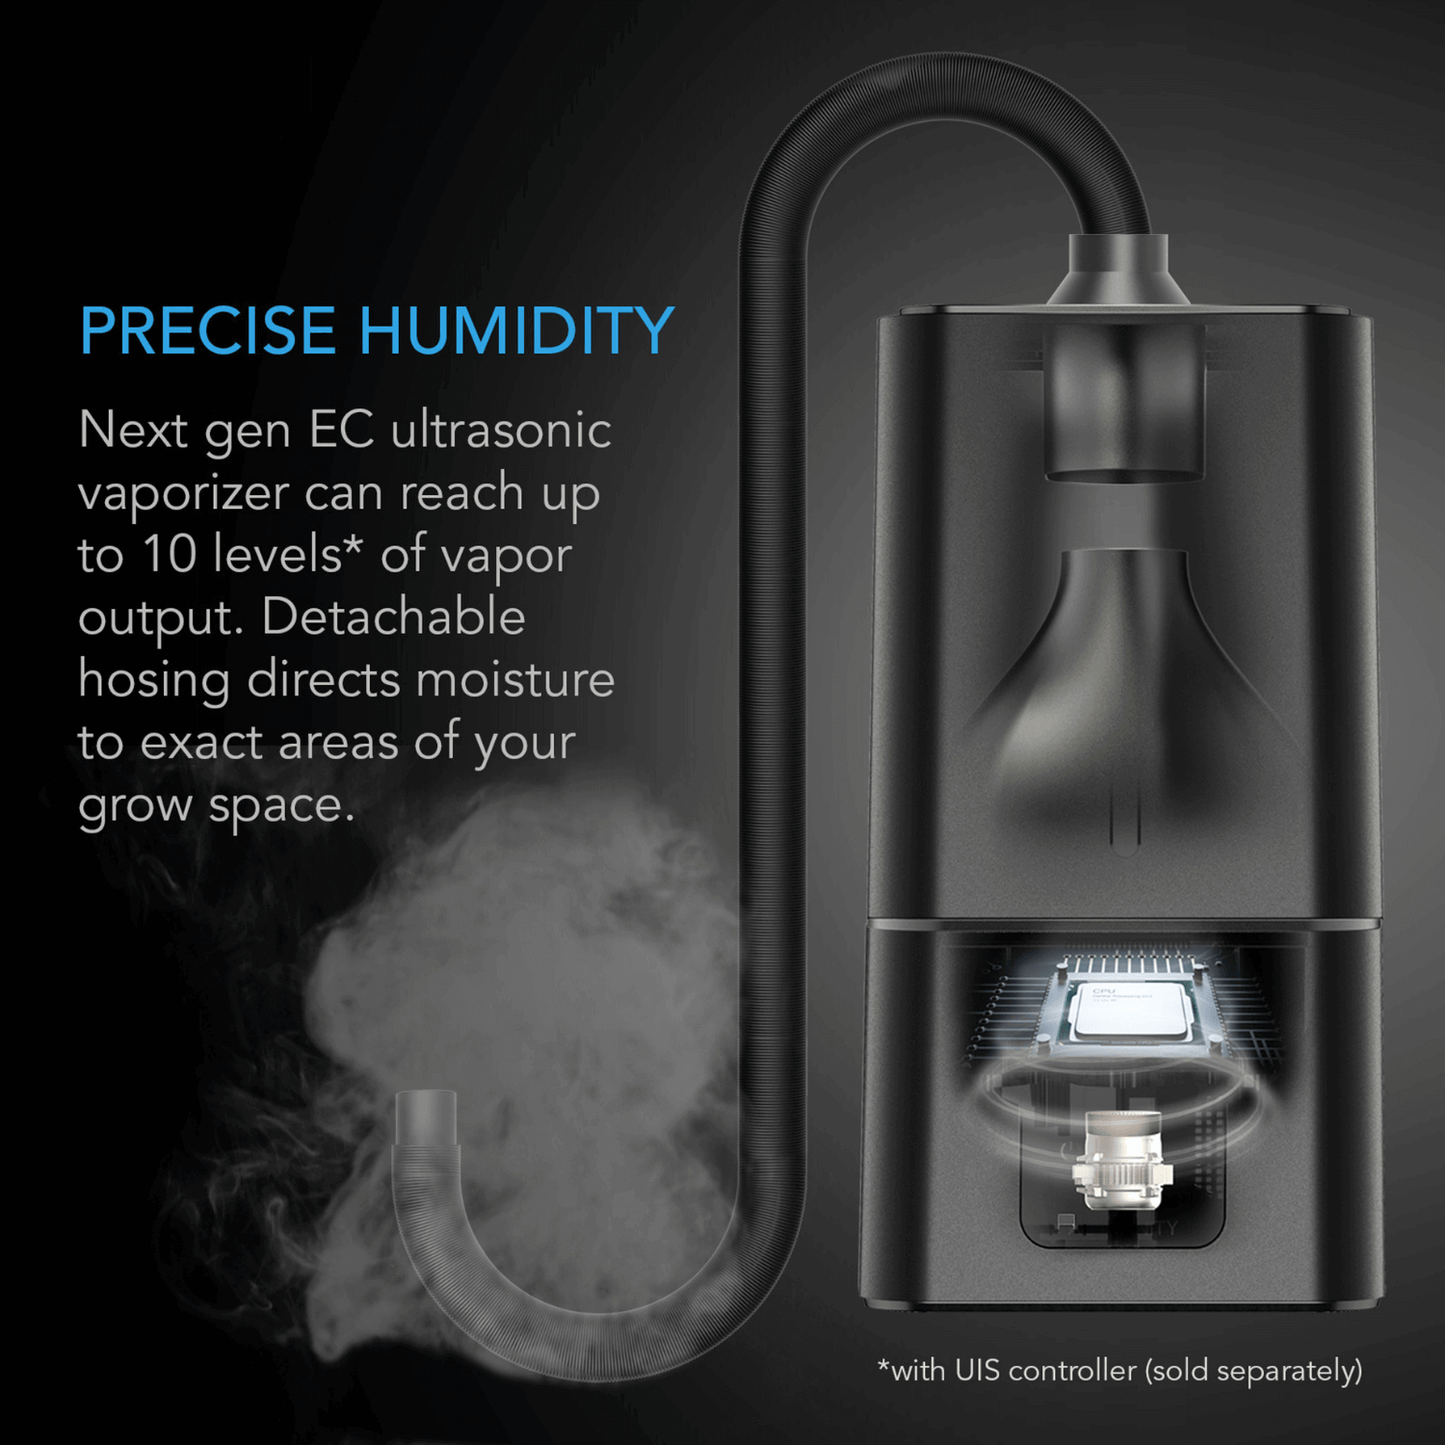 AC Infinity CLOUDFORGE T7, Environmental Plant Humidifier, 15L, Smart Controls, Targeted Vaporizing | AC-CFT7 | Grow Tents Depot | Climate Control | 819137023628